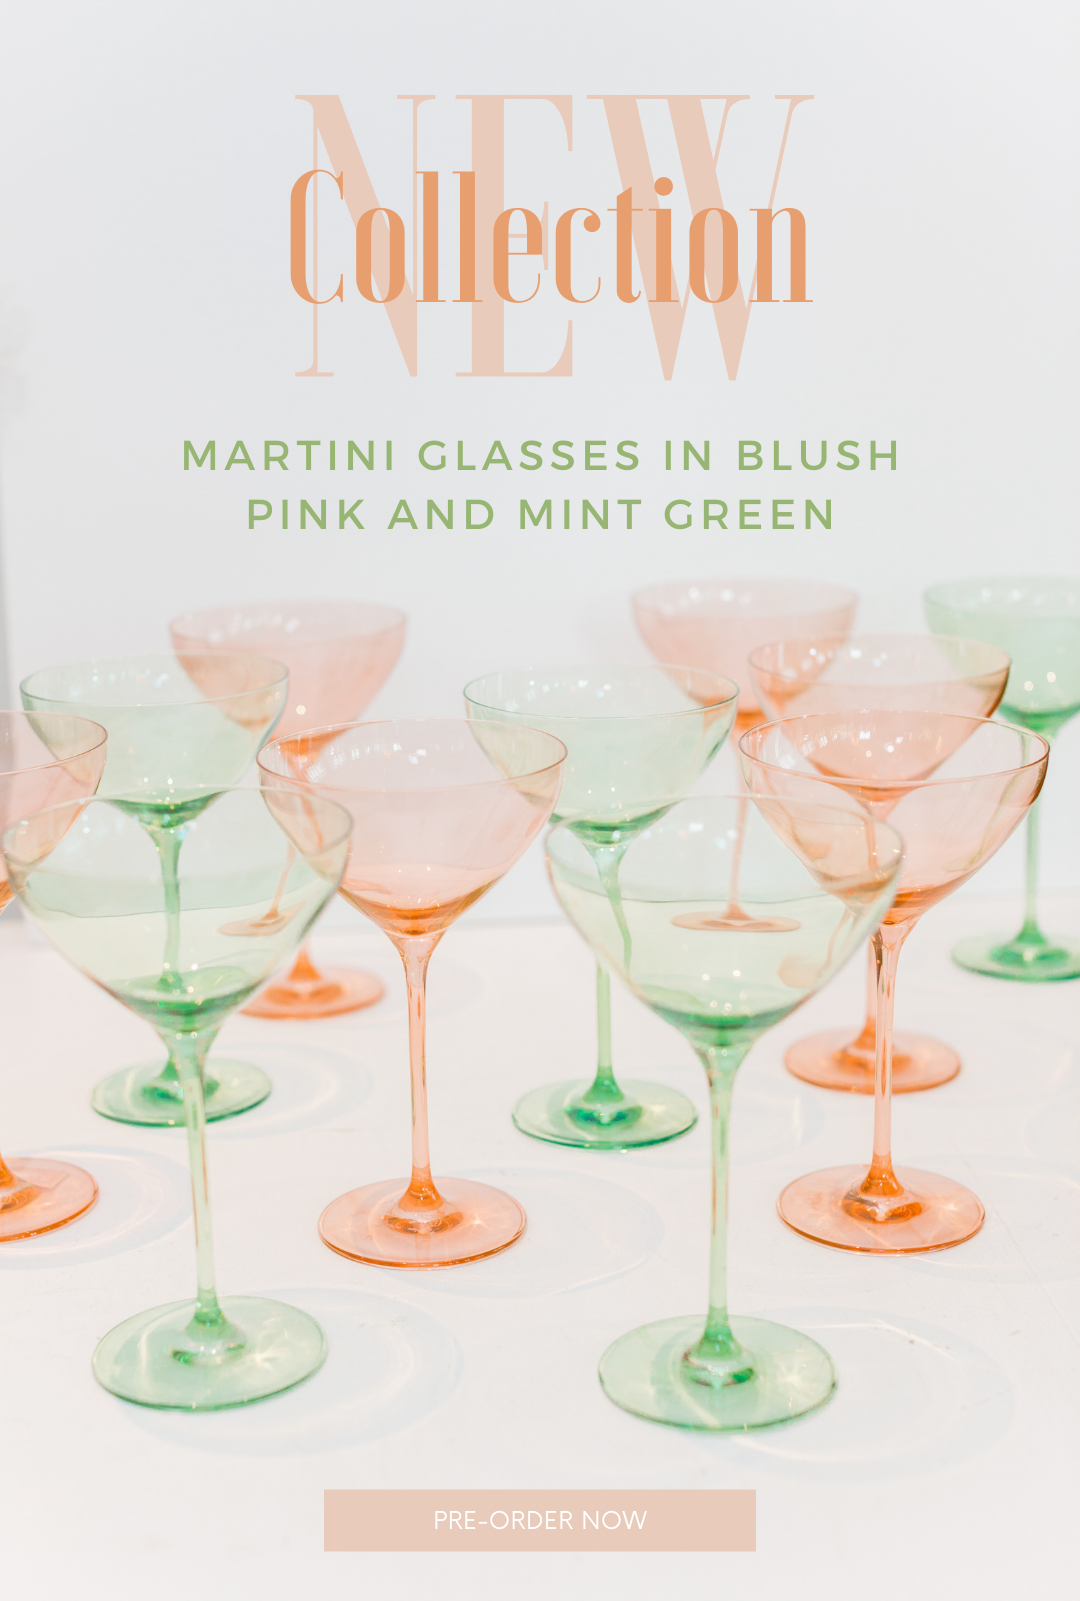 PRE-ORDER Martini Glasses Now! Limited Quantities